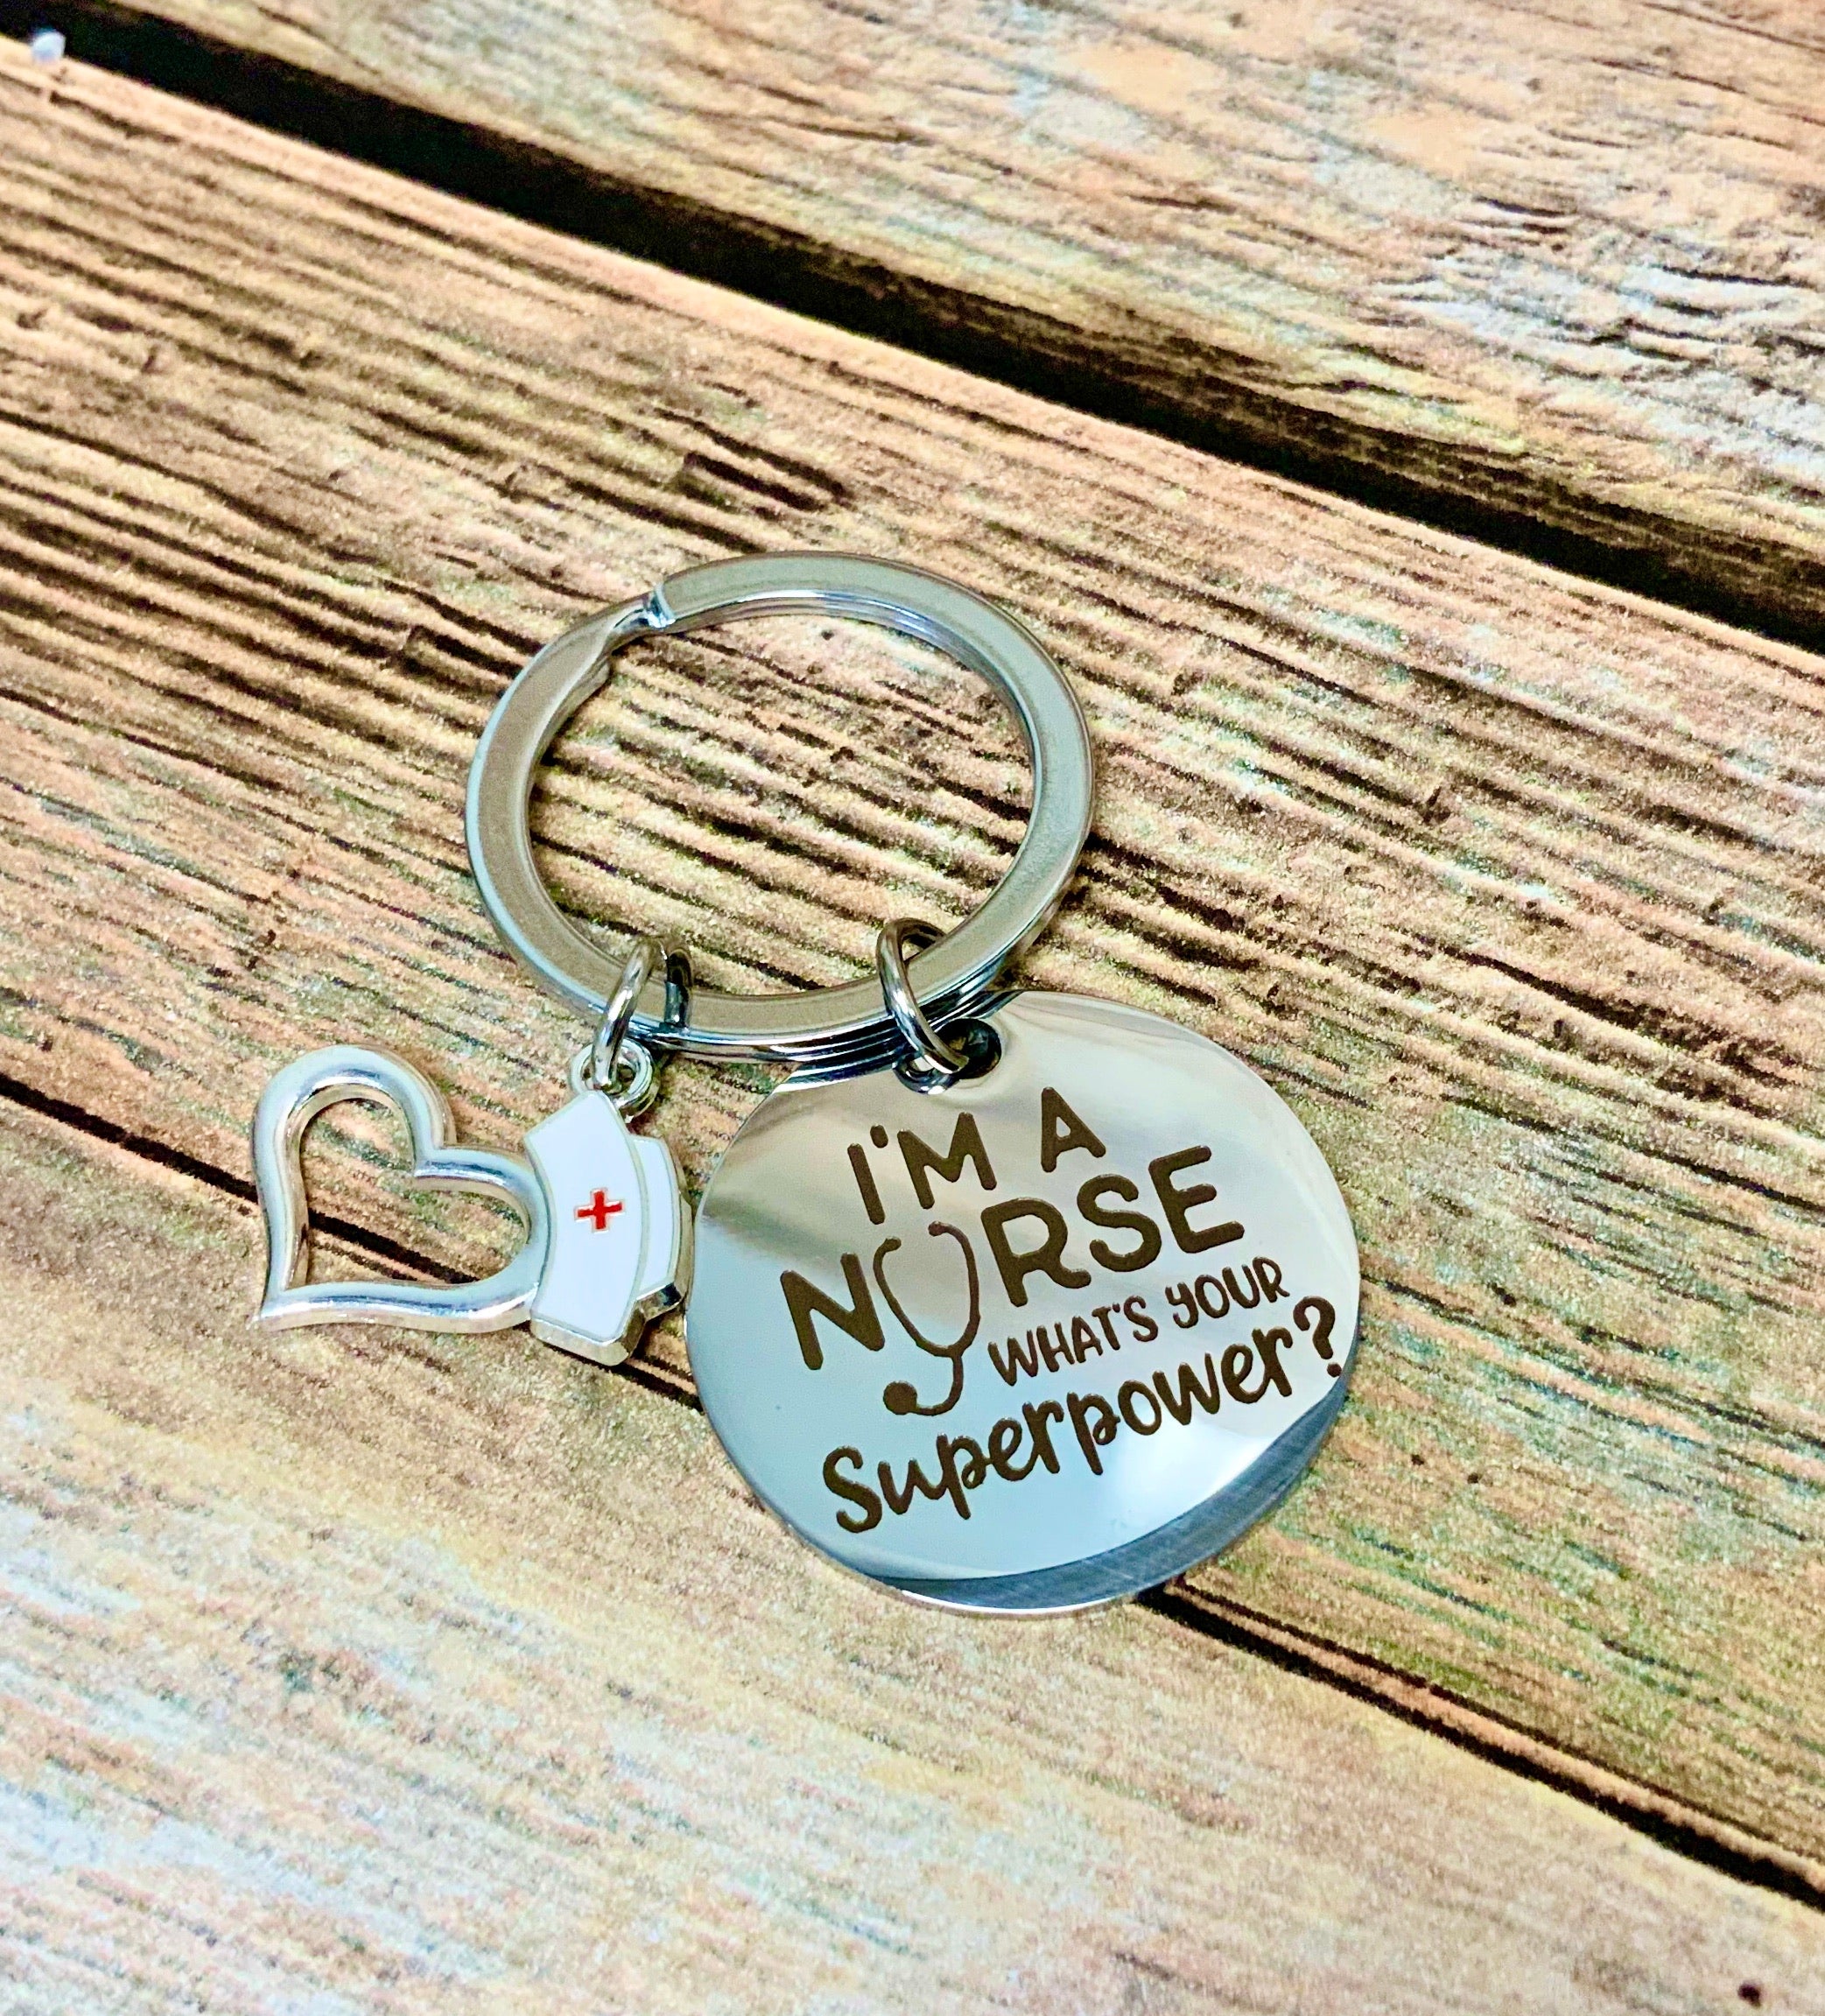 Nurse Keychain “ I am a nurse what’s your superpower” Tassel color will be shipped at random